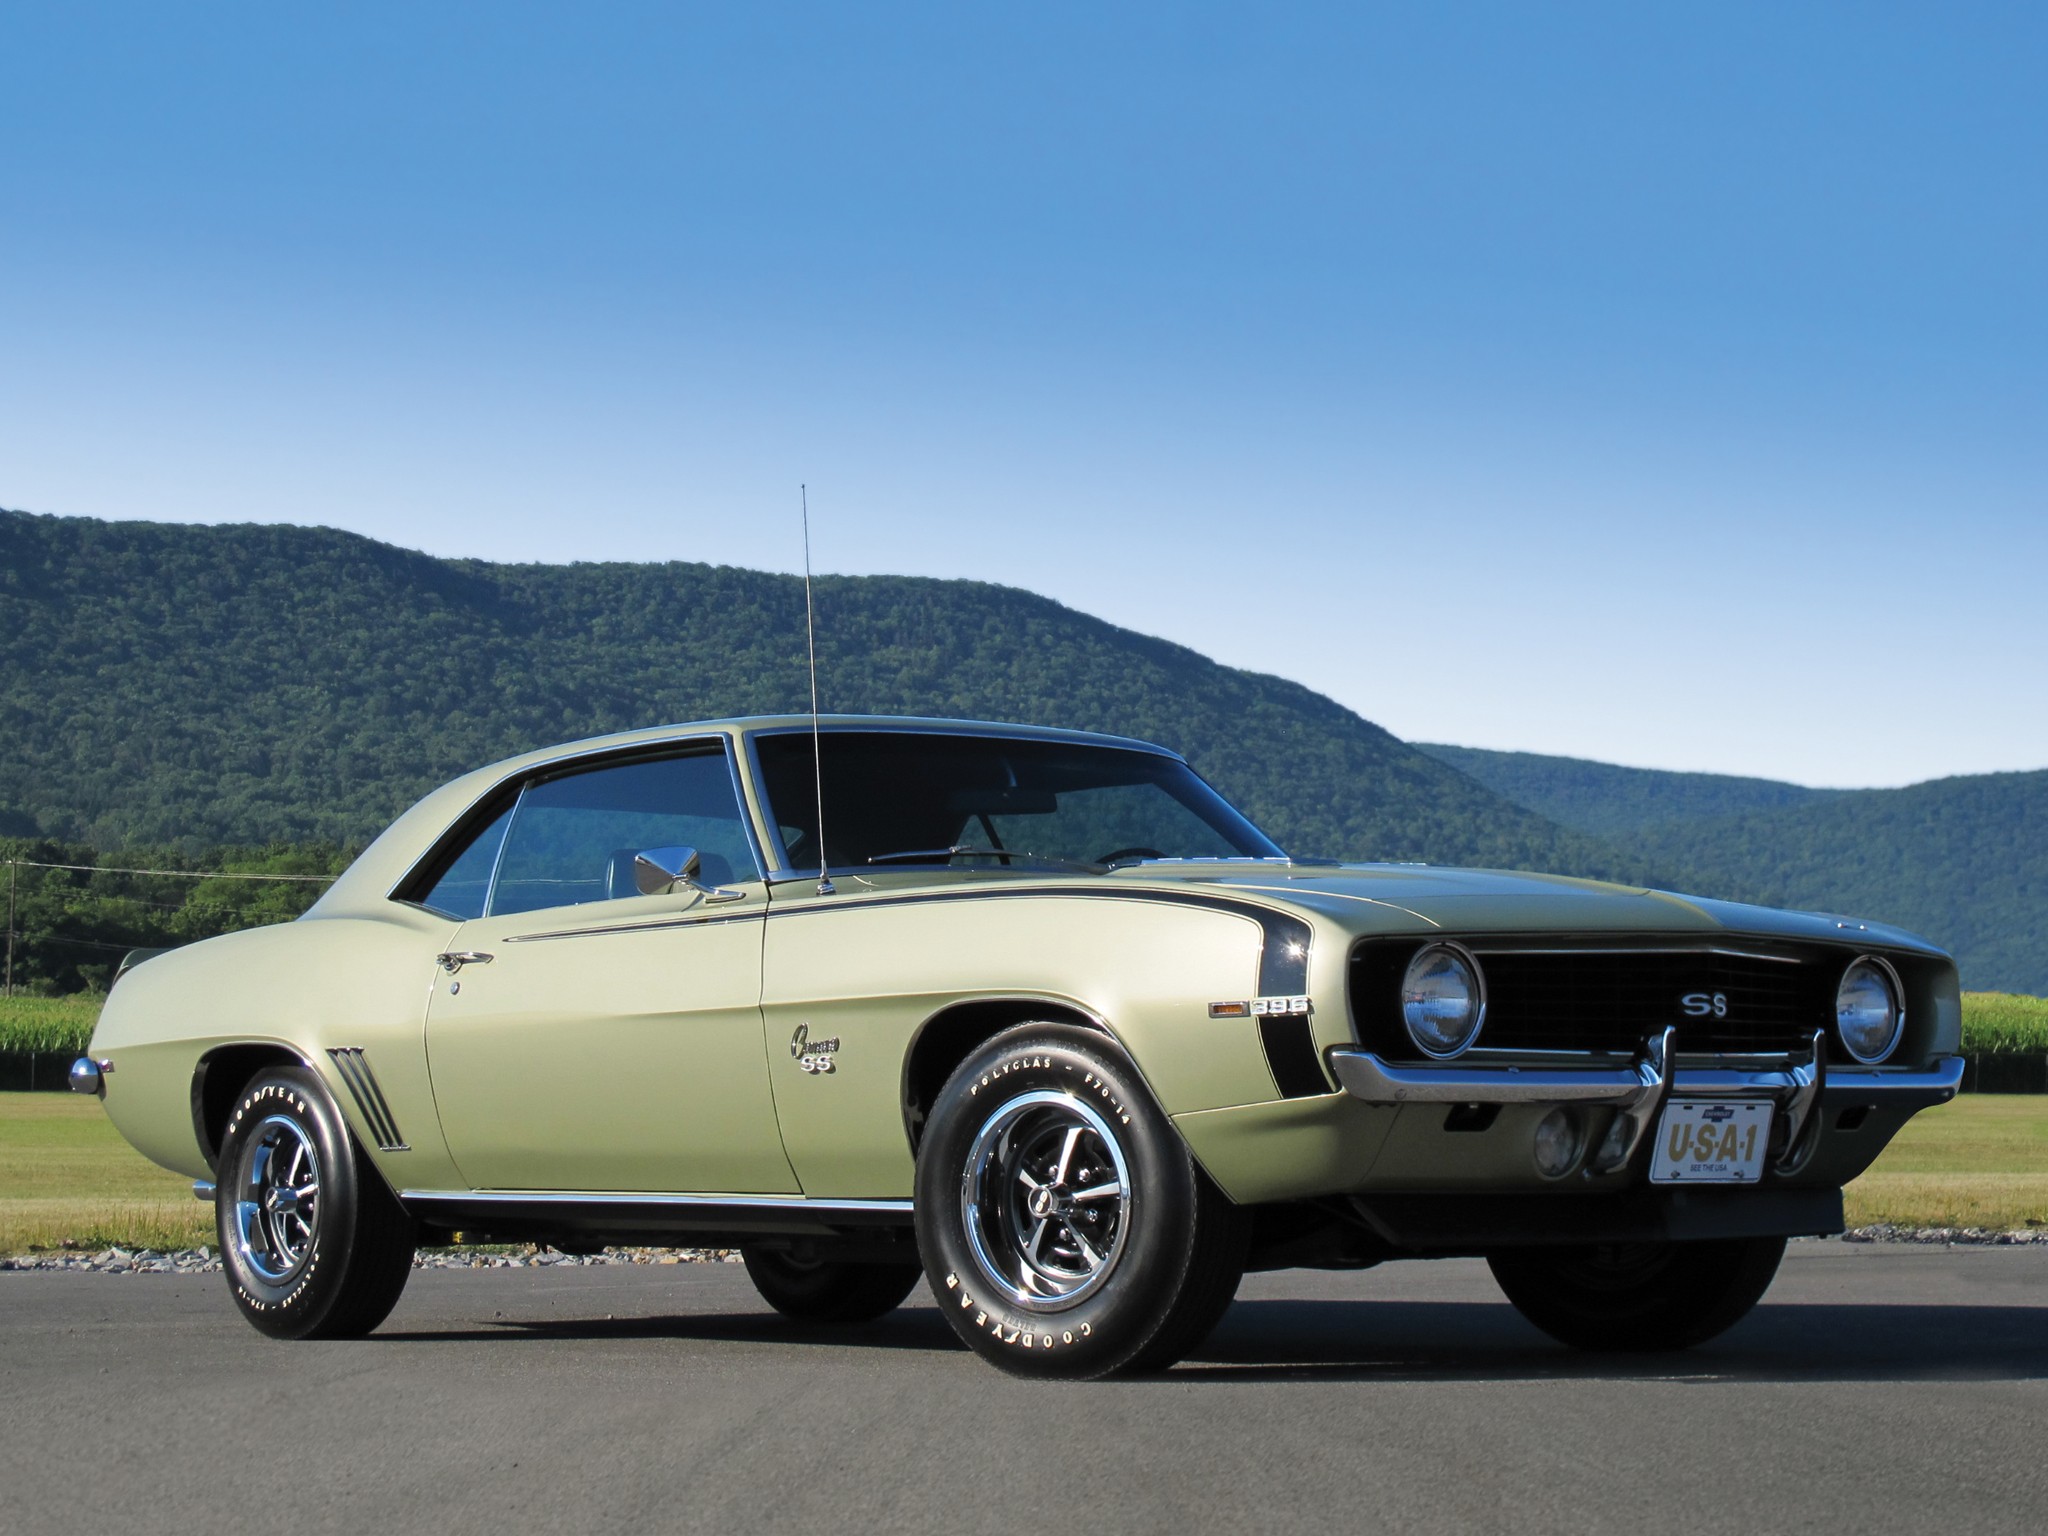 Chevrolet Camaro SS Wallpapers HD Download